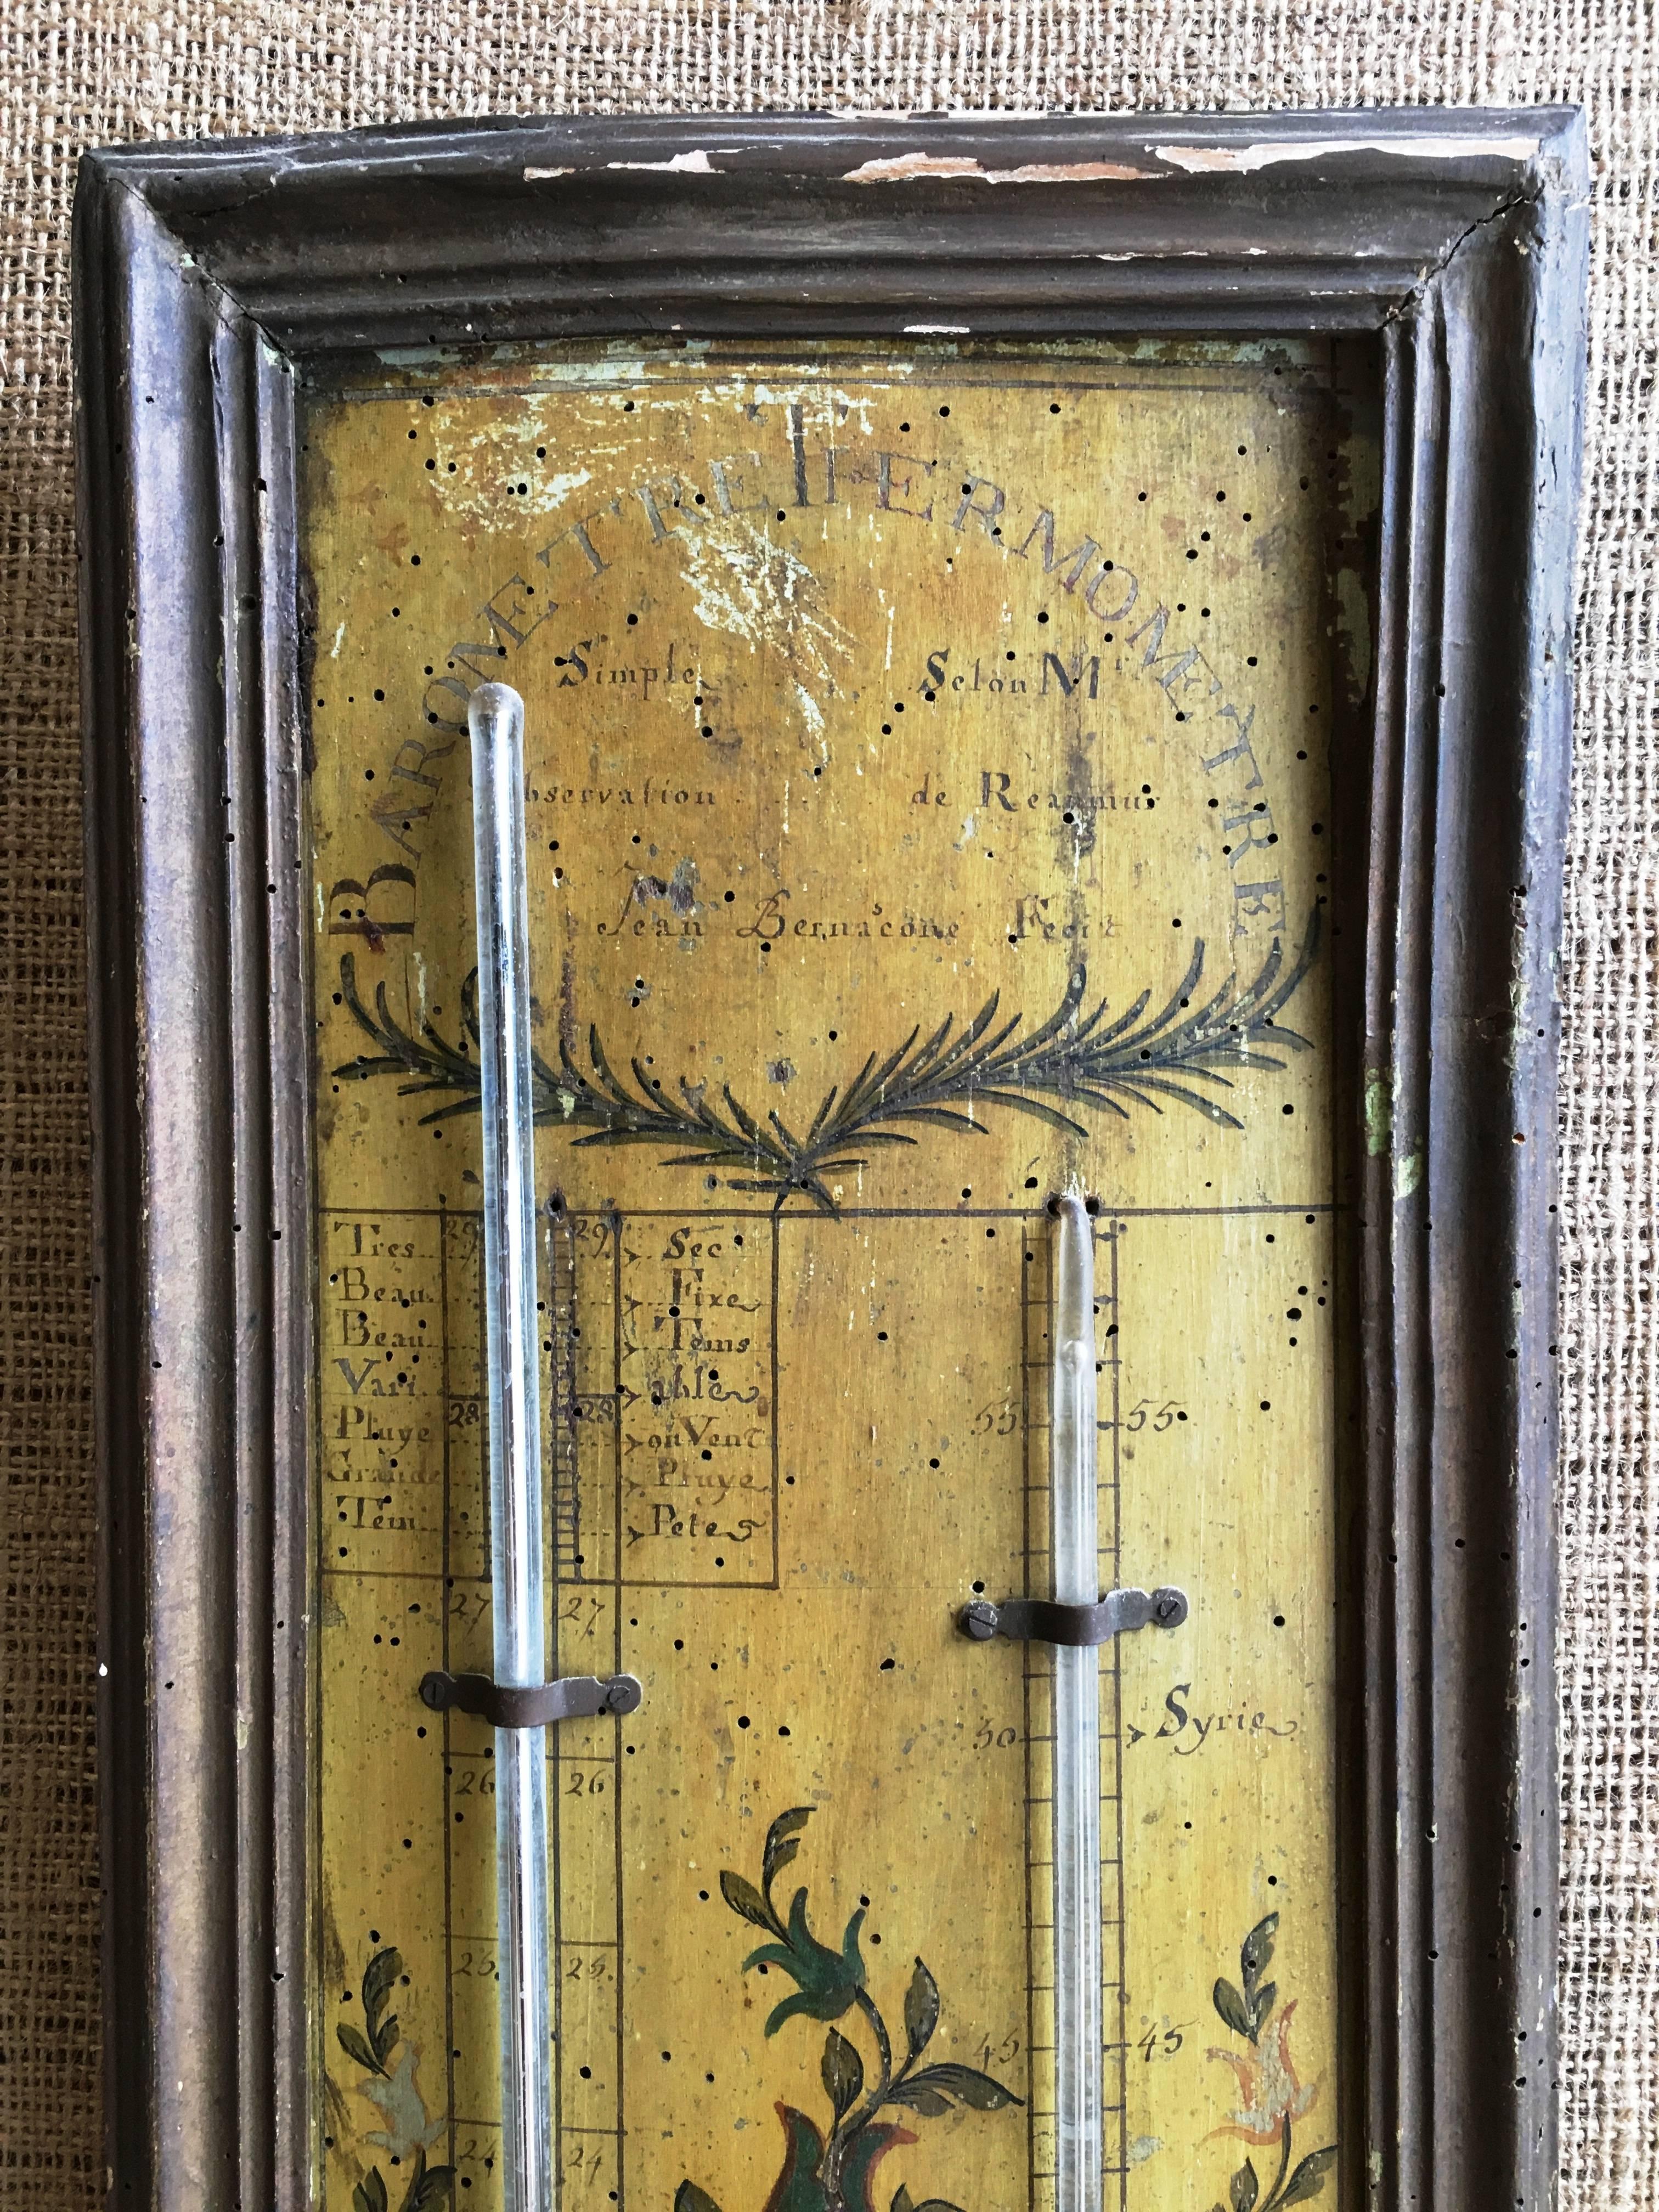 A French provincial barometer/ thermometer on a painted wood panel in a frame, circa 1790, using the Reaumur standard of measurements (Antoine Ferchault de Reaumur). Original paint and measurements.